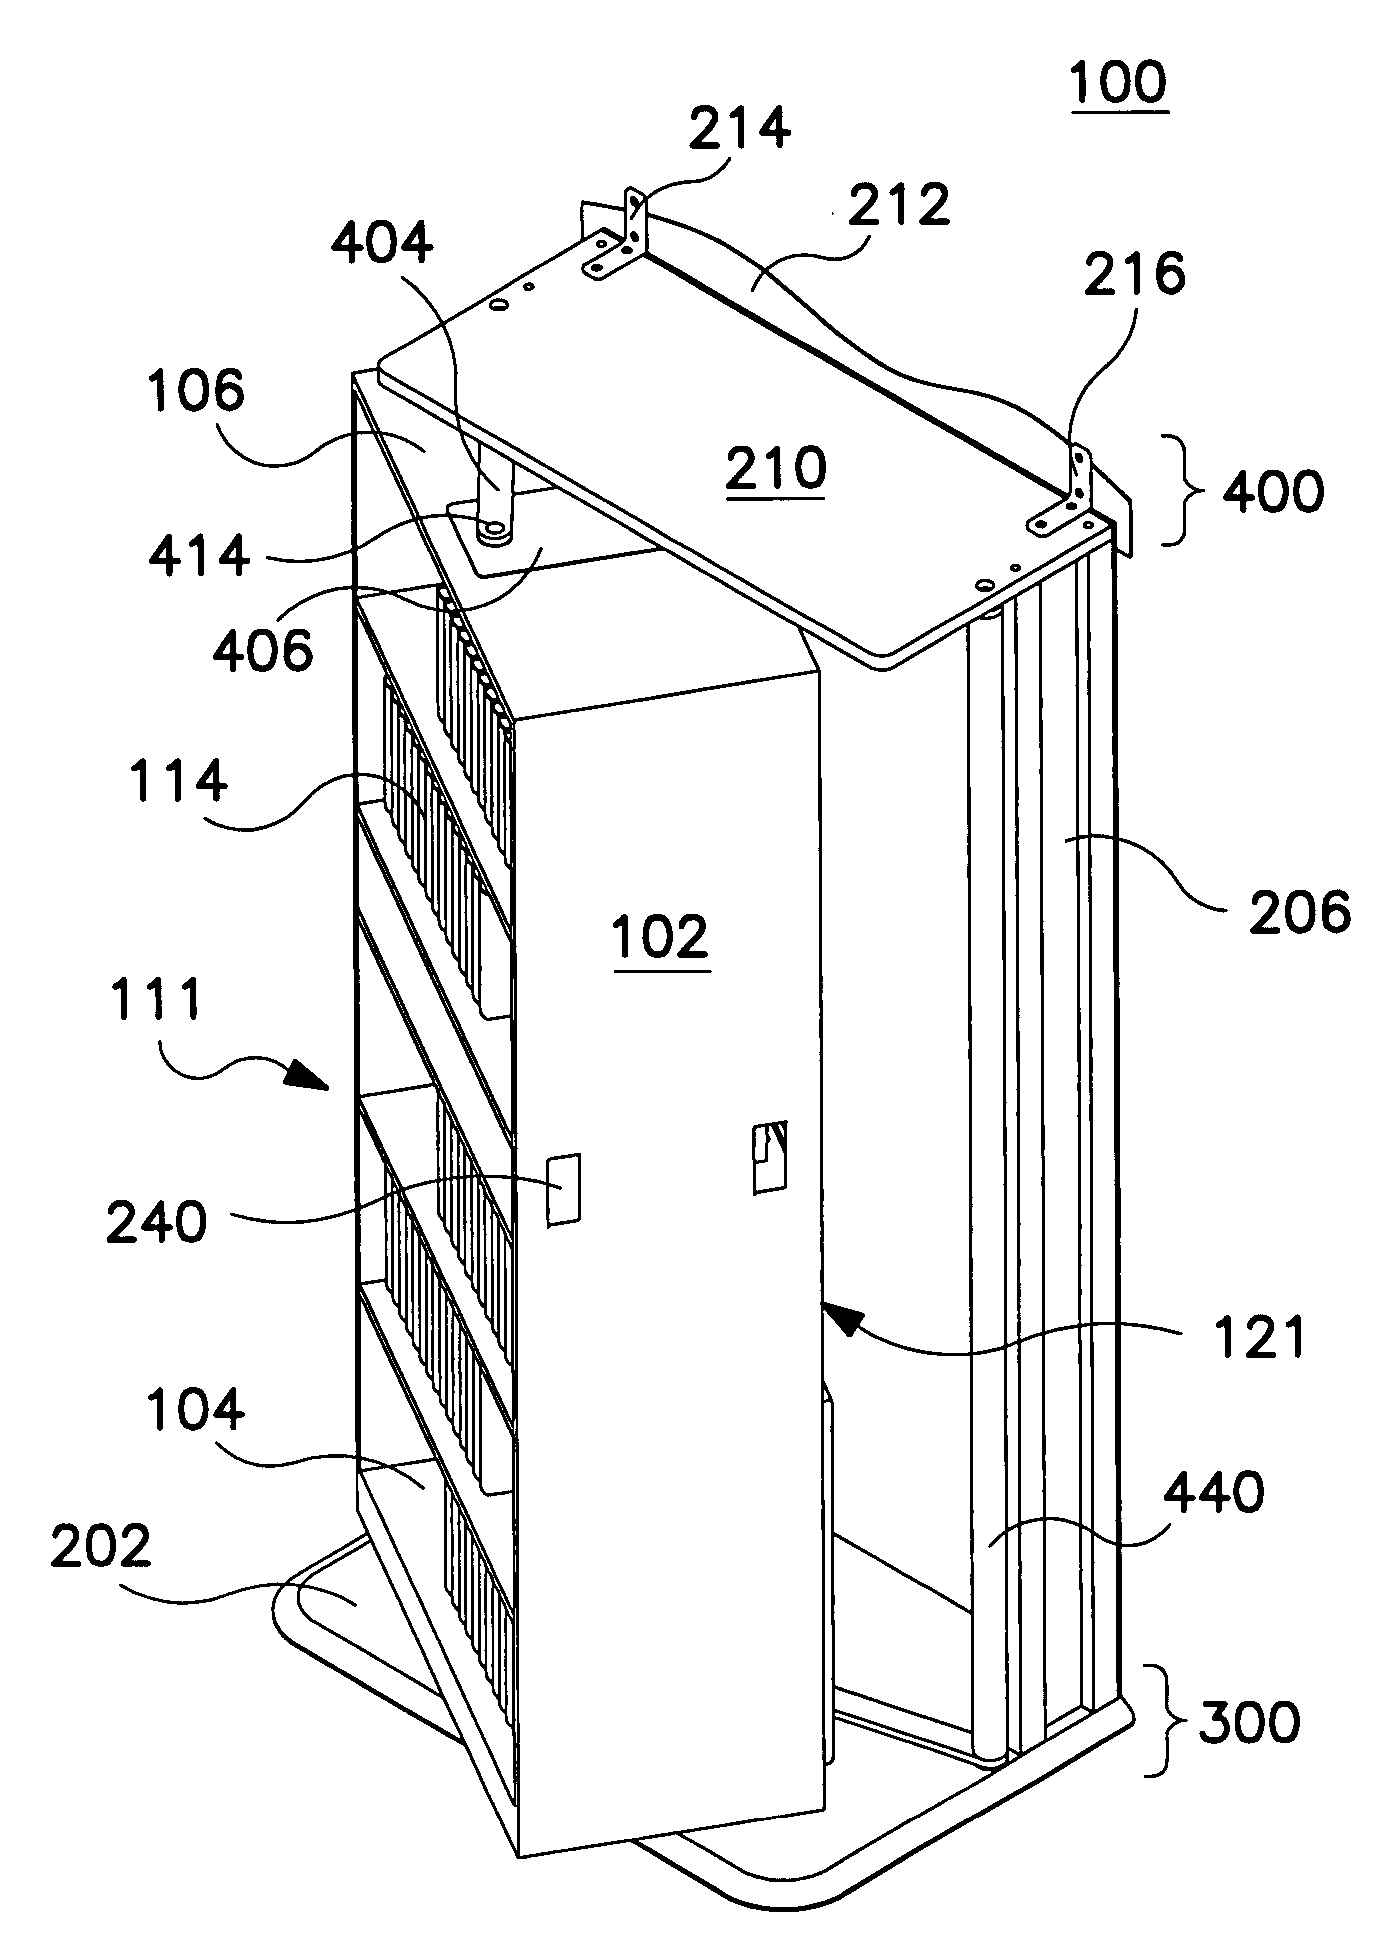 Method and apparatus for movable structure having alternative accessible sides